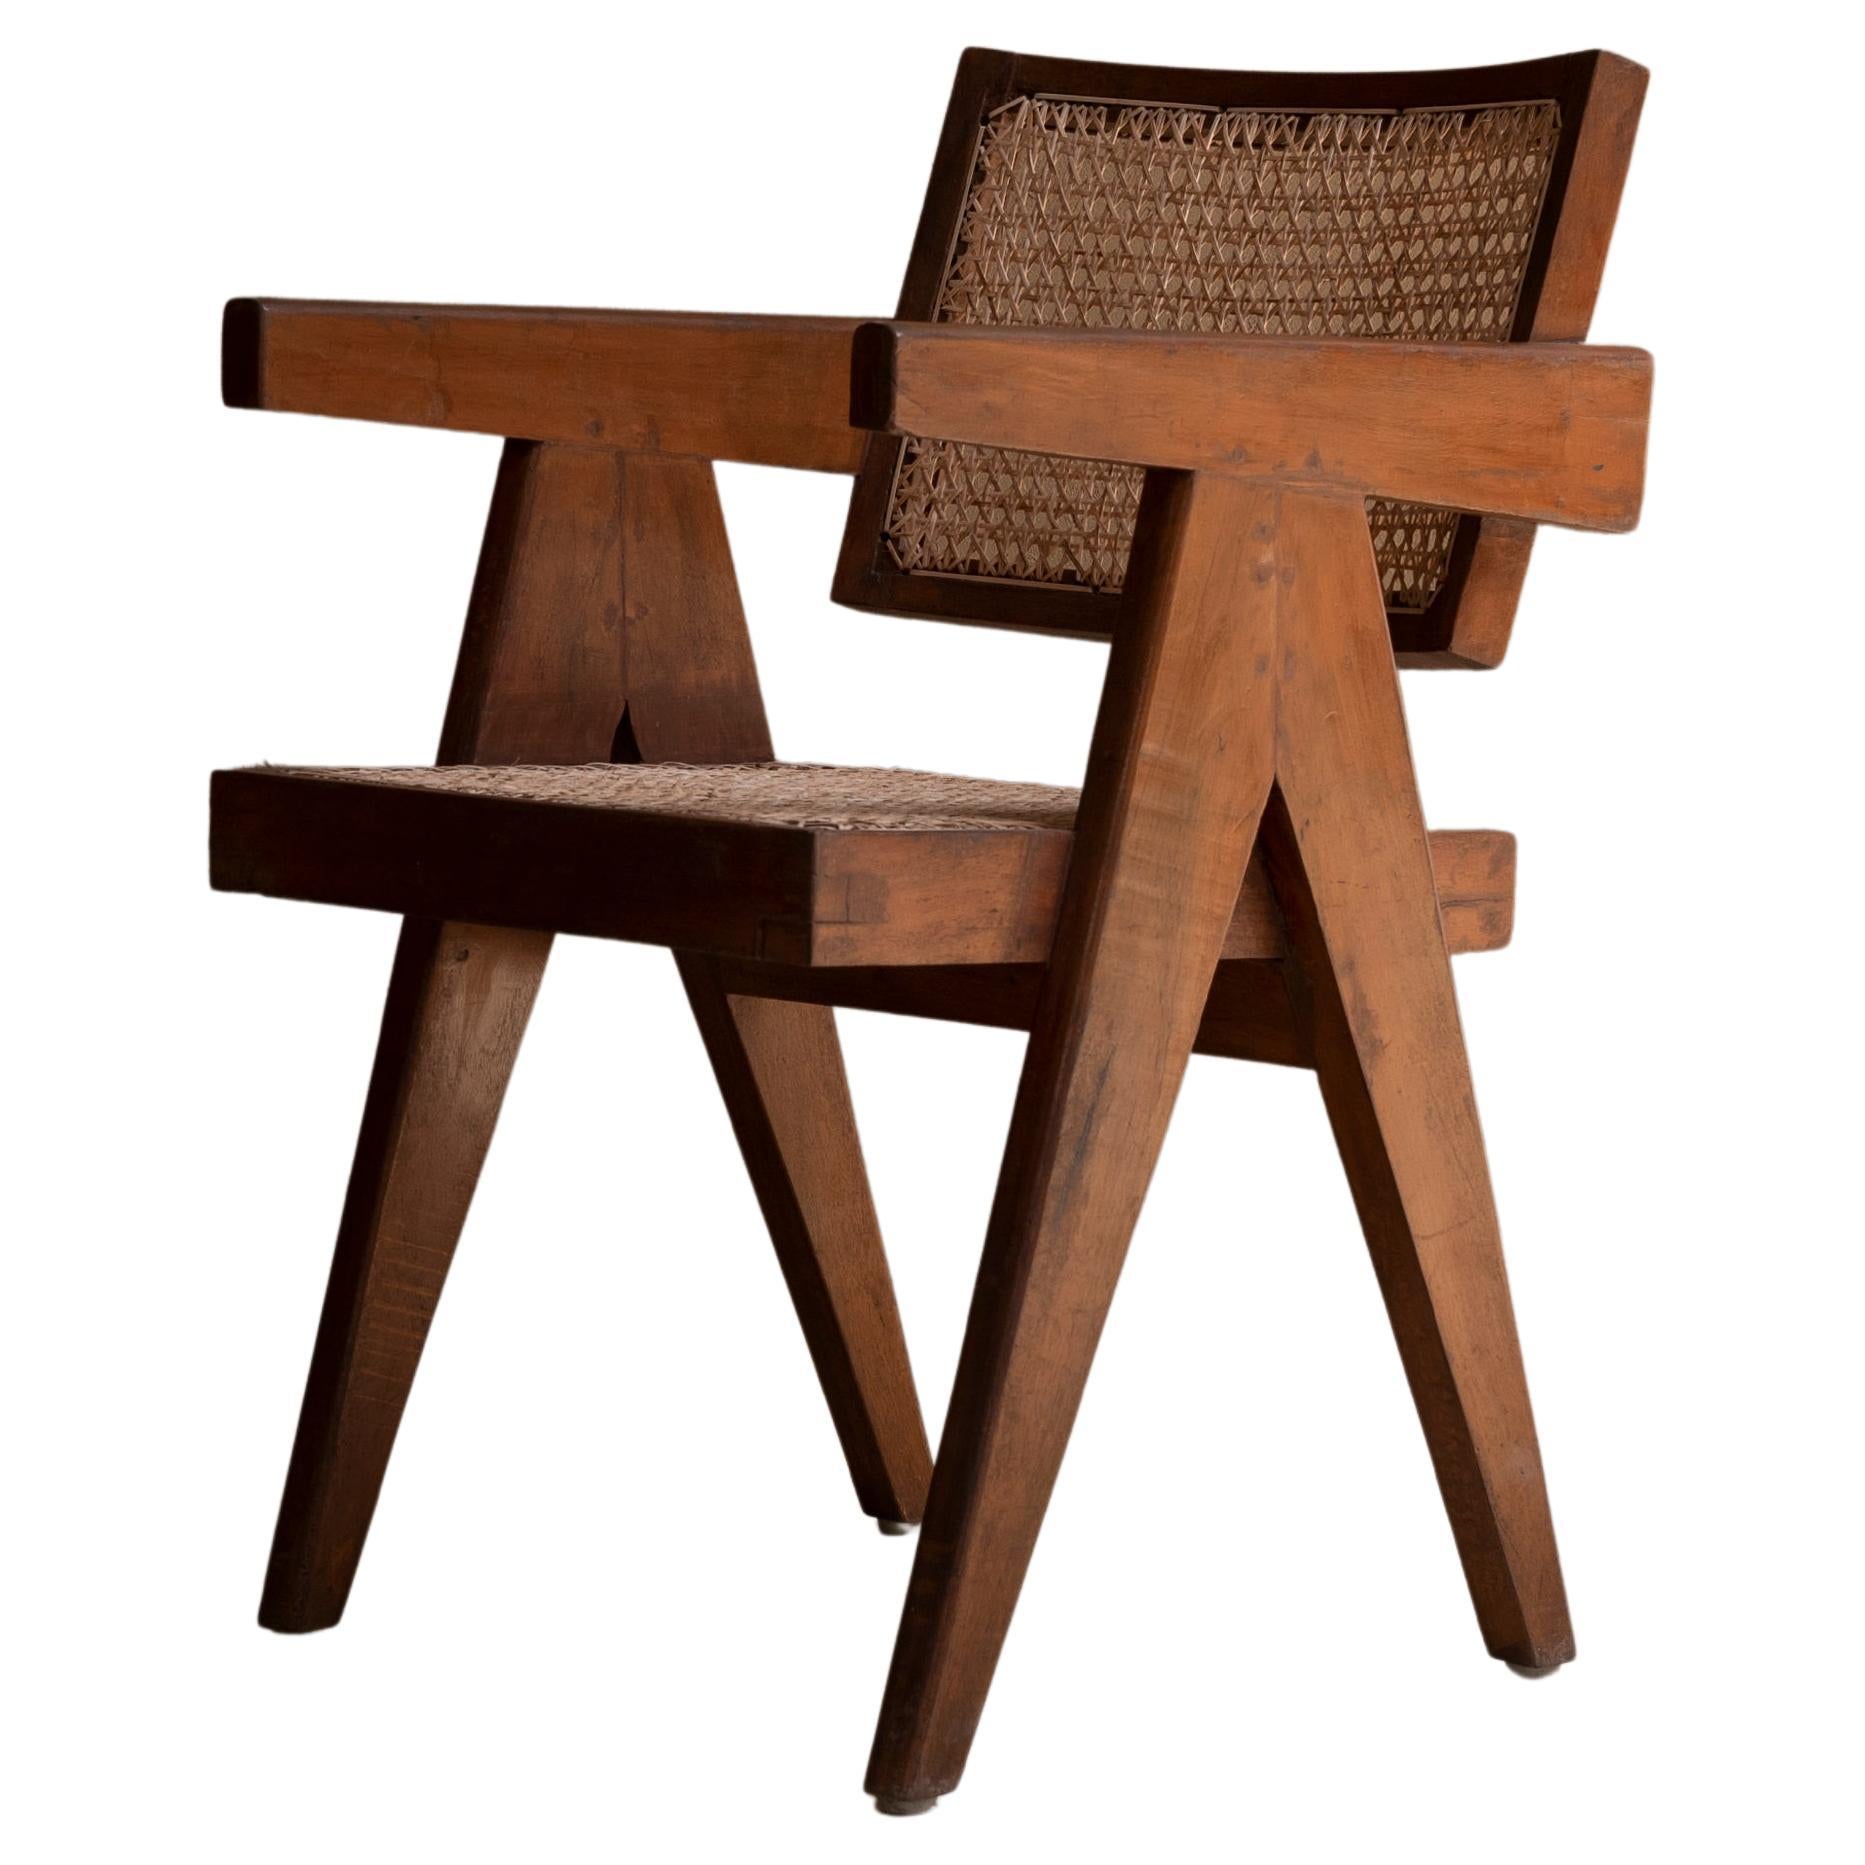 Pierre Jeanneret Office Chair, circa 1955-1956, Chandigarh, India For Sale